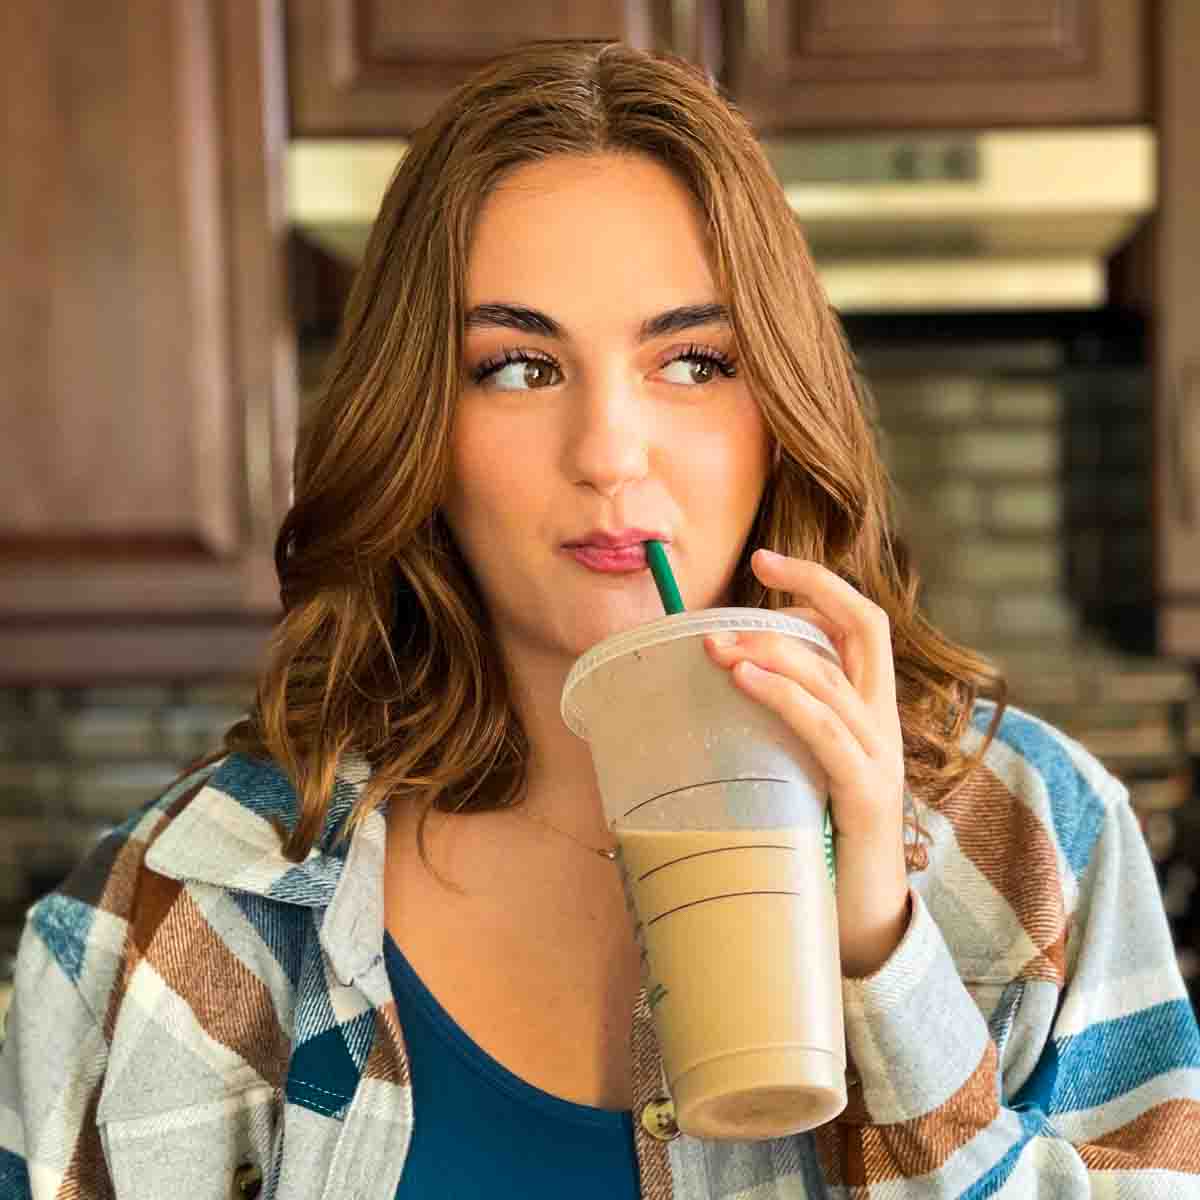 Rosie drinking on a homemade iced coffee in her kitchen.